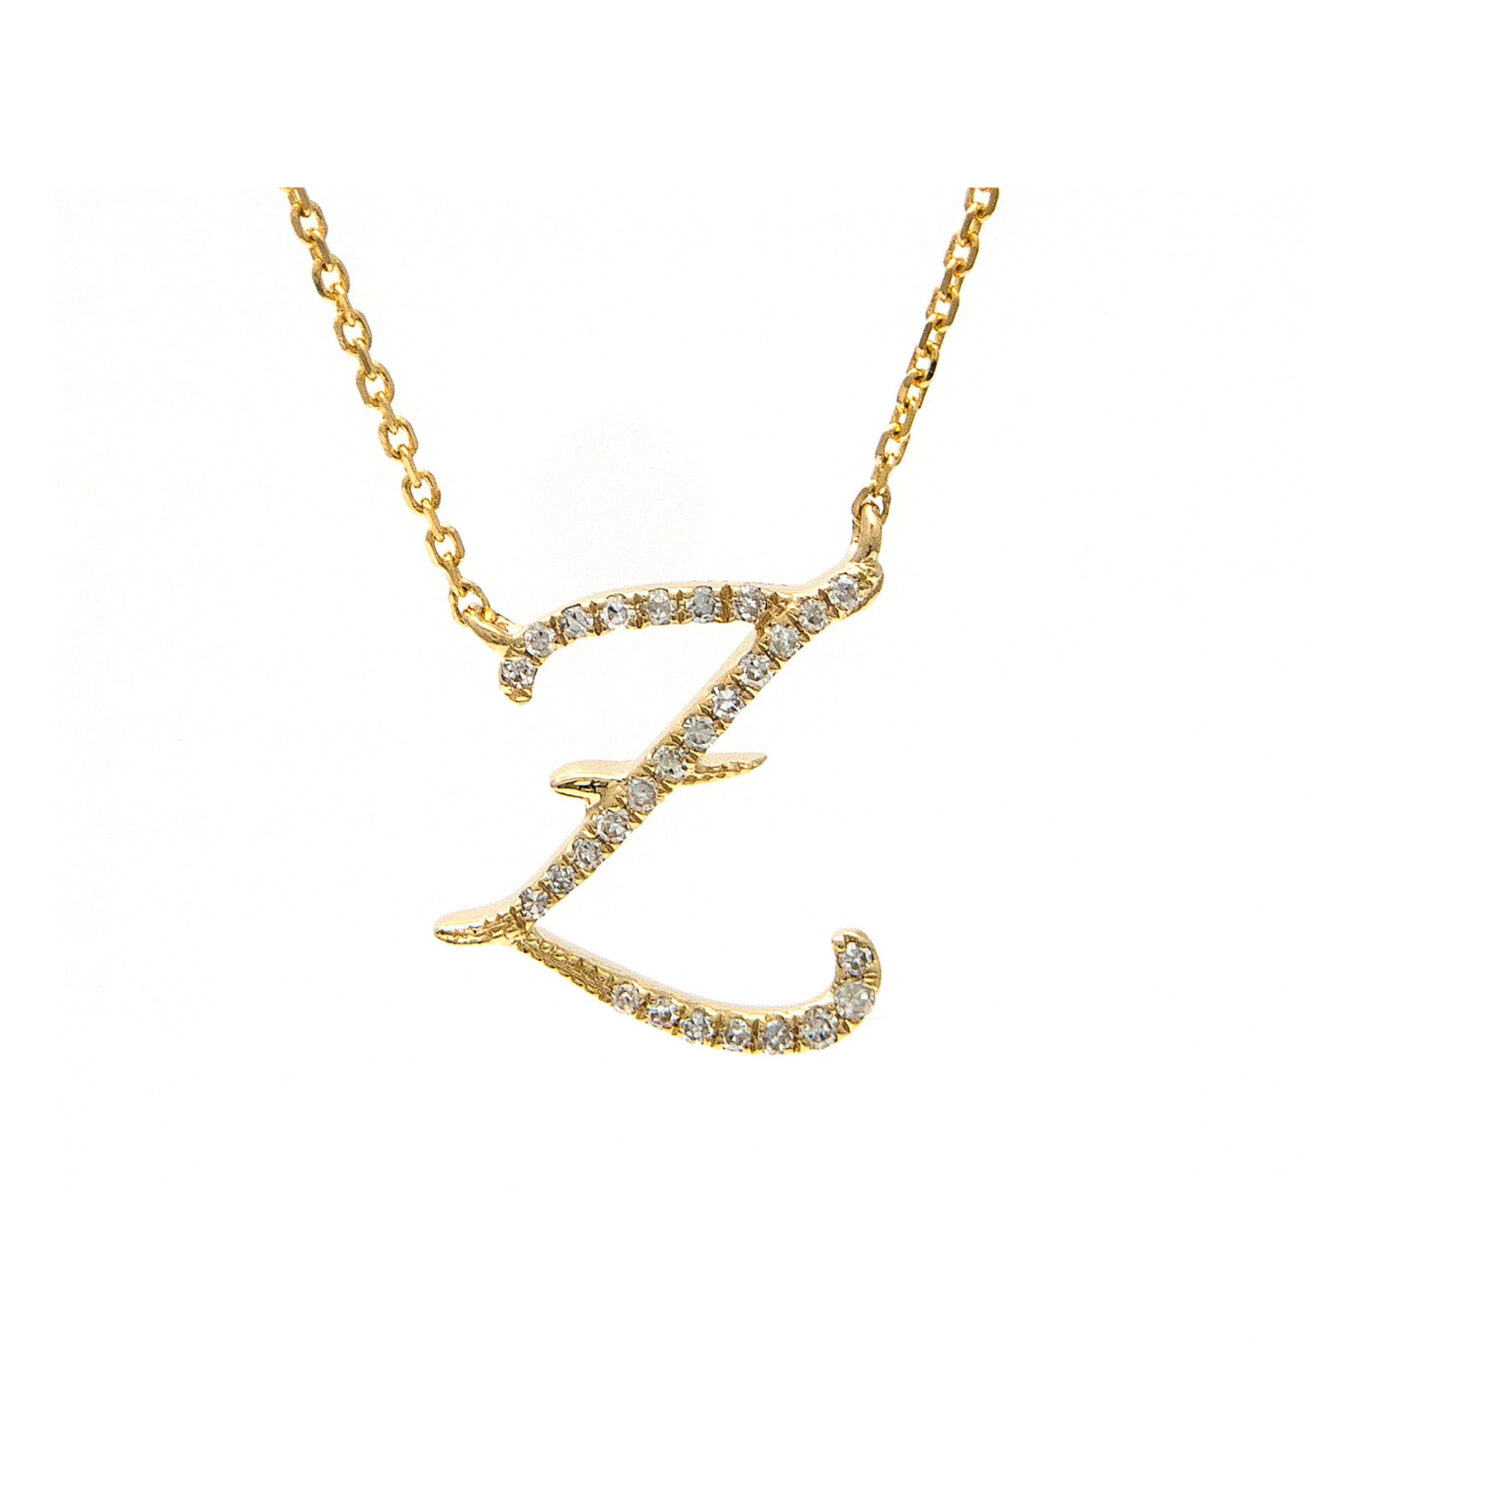 Elongated Cushion Moissanite Necklace, 14 kt gold 1.77 ctw